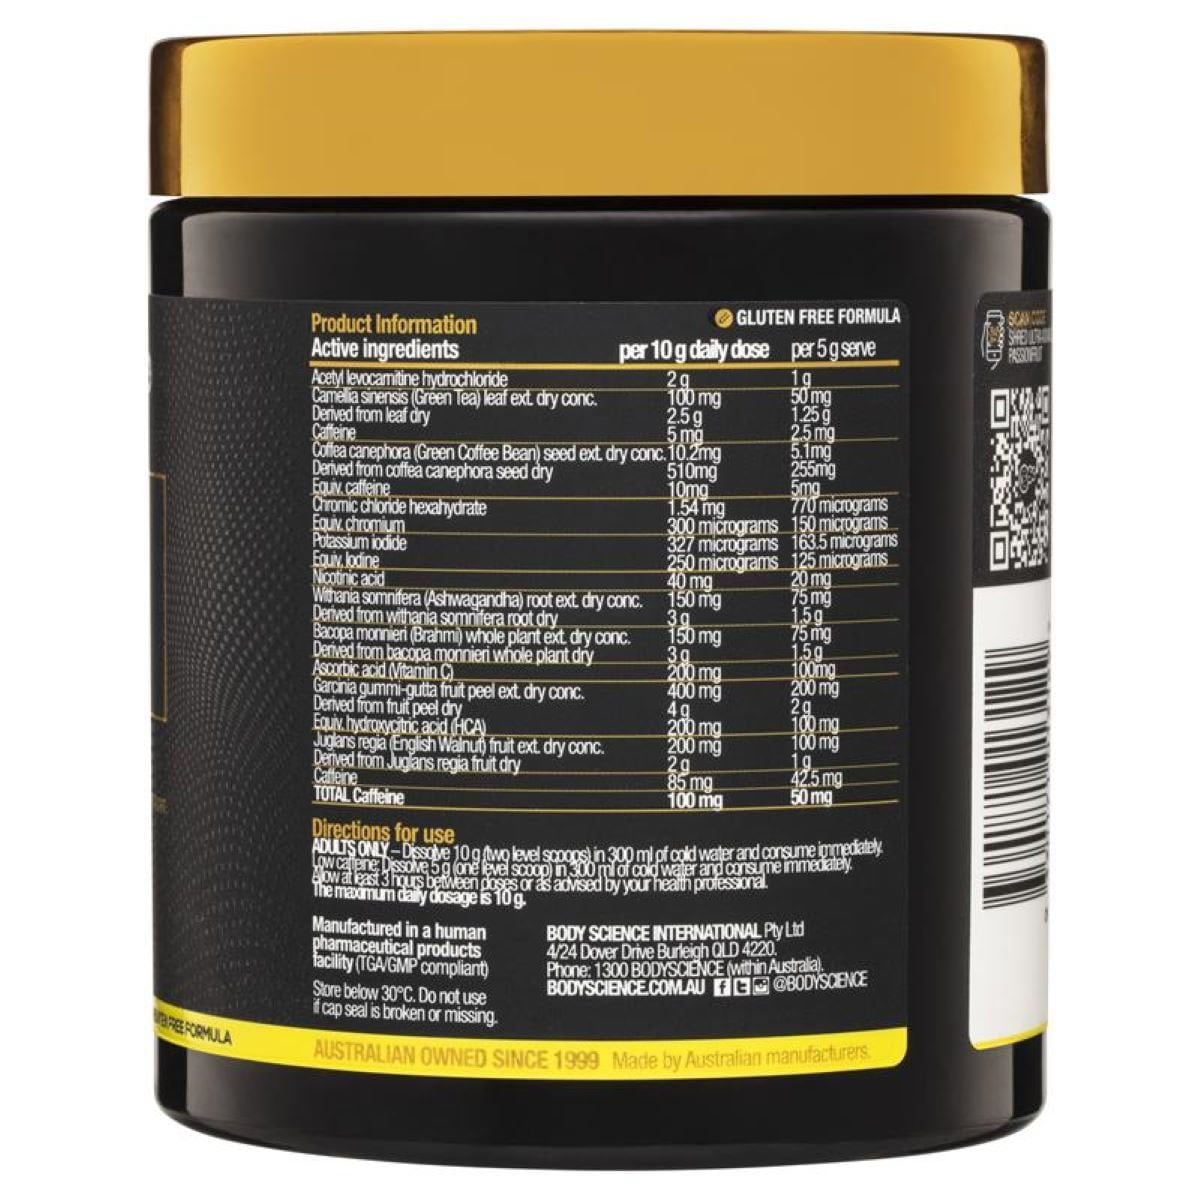 BSc Body Science Shred Ultra Advanced Passionfruit 300g